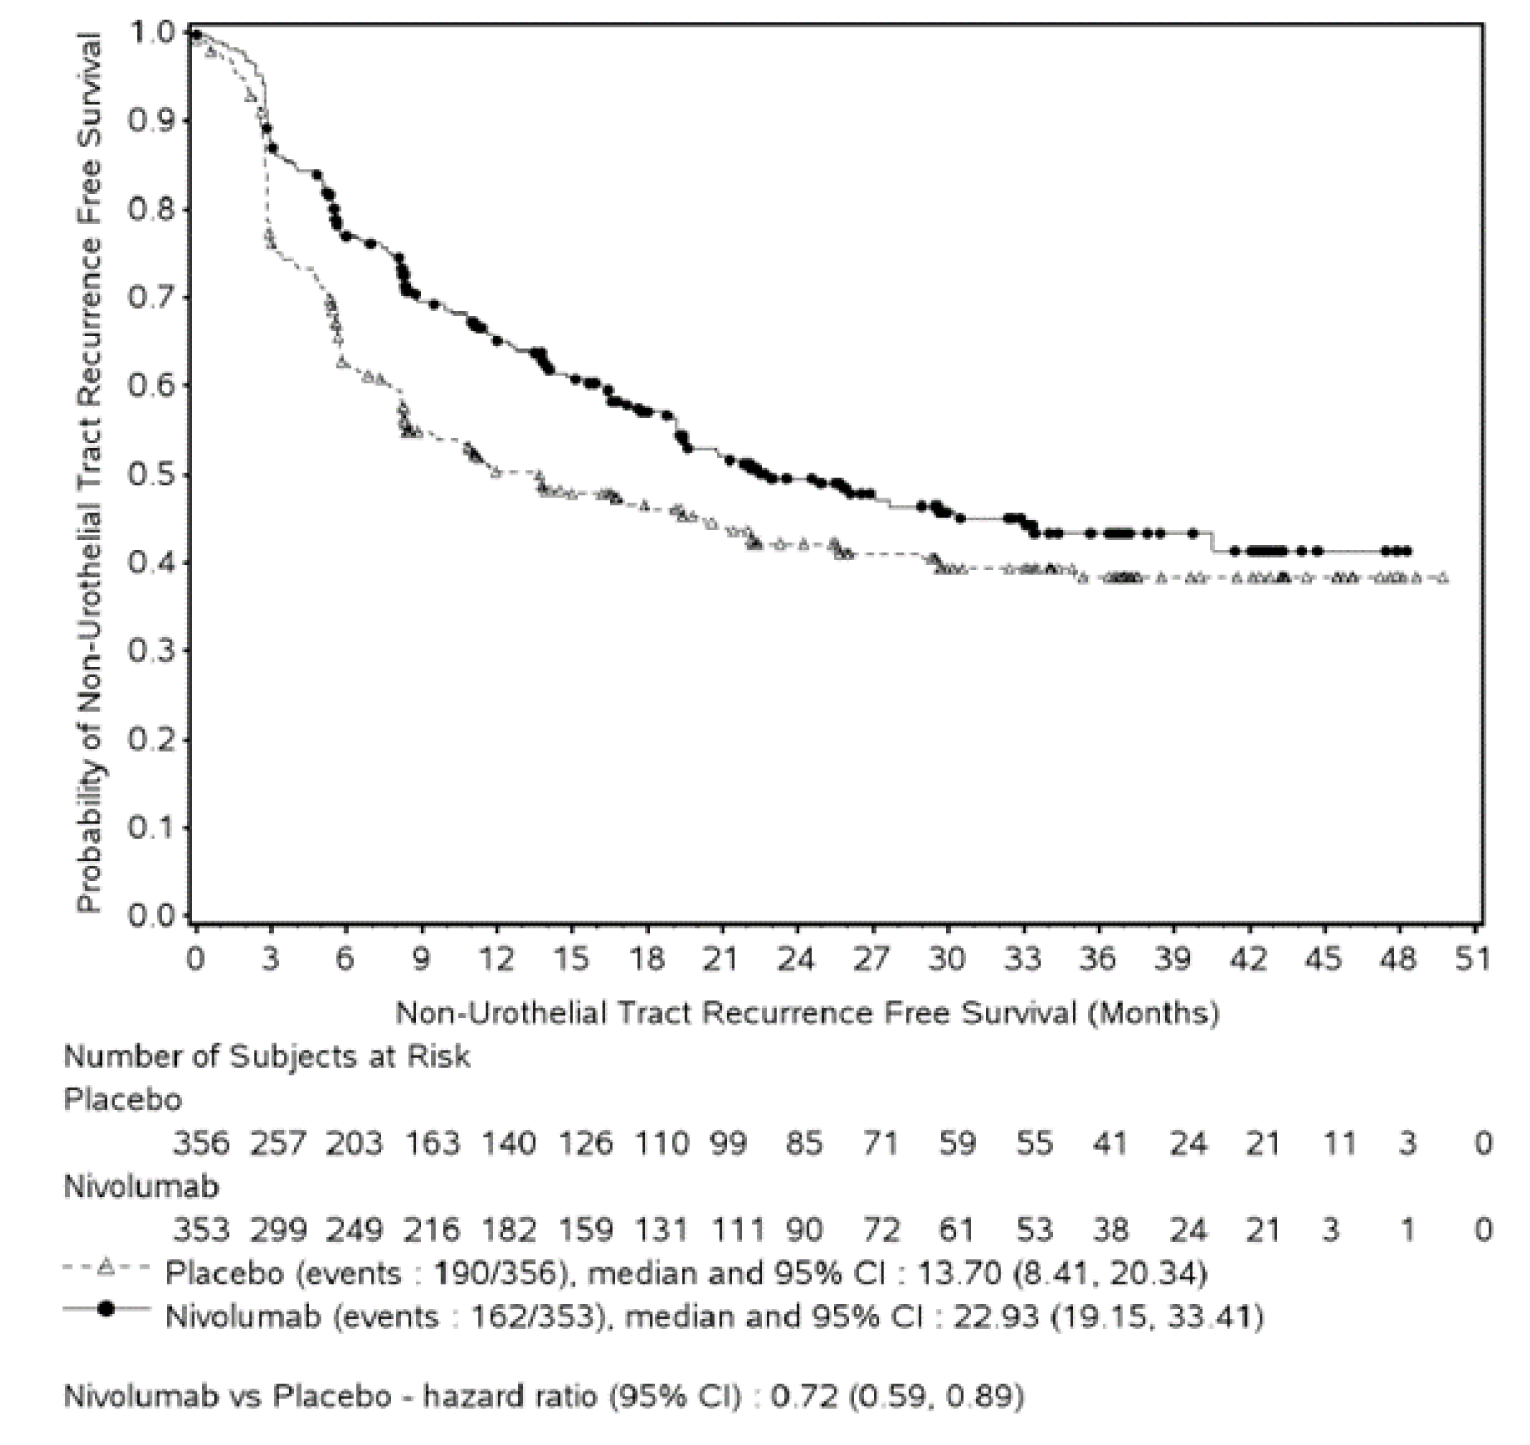 In this Kaplan-Meier analysis of NUTRFS among patients in the CheckMate 274 trial, the curves representing patients who received nivolumab and placebo follow a similar downward slope, with the placebo curve falling below the nivolumab curve. Median (95% CI) NUTRFS was 22.9 months (19.2 to 33.4) among patients receiving nivolumab and 13.7 months (8.4 to 20.3) among patients receiving placebo (HR = 0.7; 95% CI, 0.6 to 0.9). The number of at-risk patients receiving nivolumab at 0, 3, 6, 9, 12, 15, 18, 21, 24, 27, 30, 33, 36, 39, 42, 45, 48, and 51 months was 353, 299, 249, 216, 182, 159, 131, 111, 90, 72, 61, 53, 38, 24, 21, 3, 1, and 0 respectively. The number of at-risk patients receiving placebo at 0, 3, 6, 9, 12, 15, 18, 21, 24, 27, 30, 33, 36, 39, 42, 45, 48, and 51 was 356, 257, 203, 163, 140, 126, 110, 99, 85, 71, 59, 55, 41, 24, 21, 11, 3, and 0, respectively.